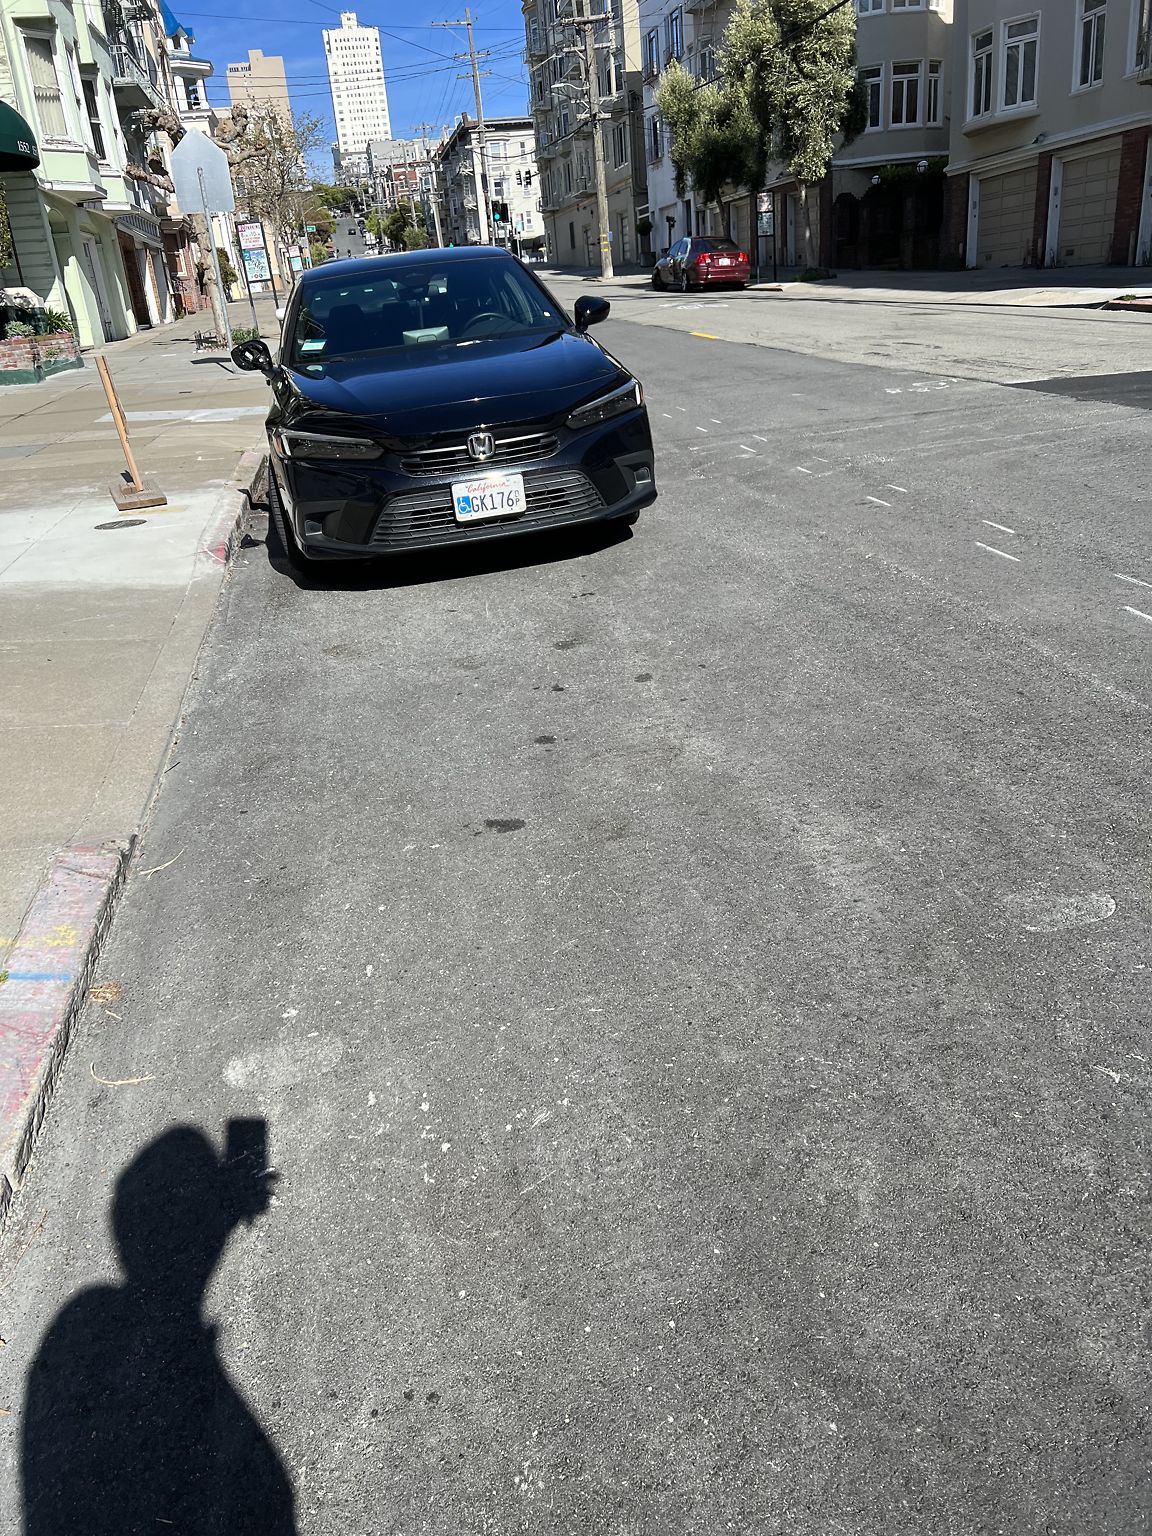 Photo of car in the street with license plate GK176 in California